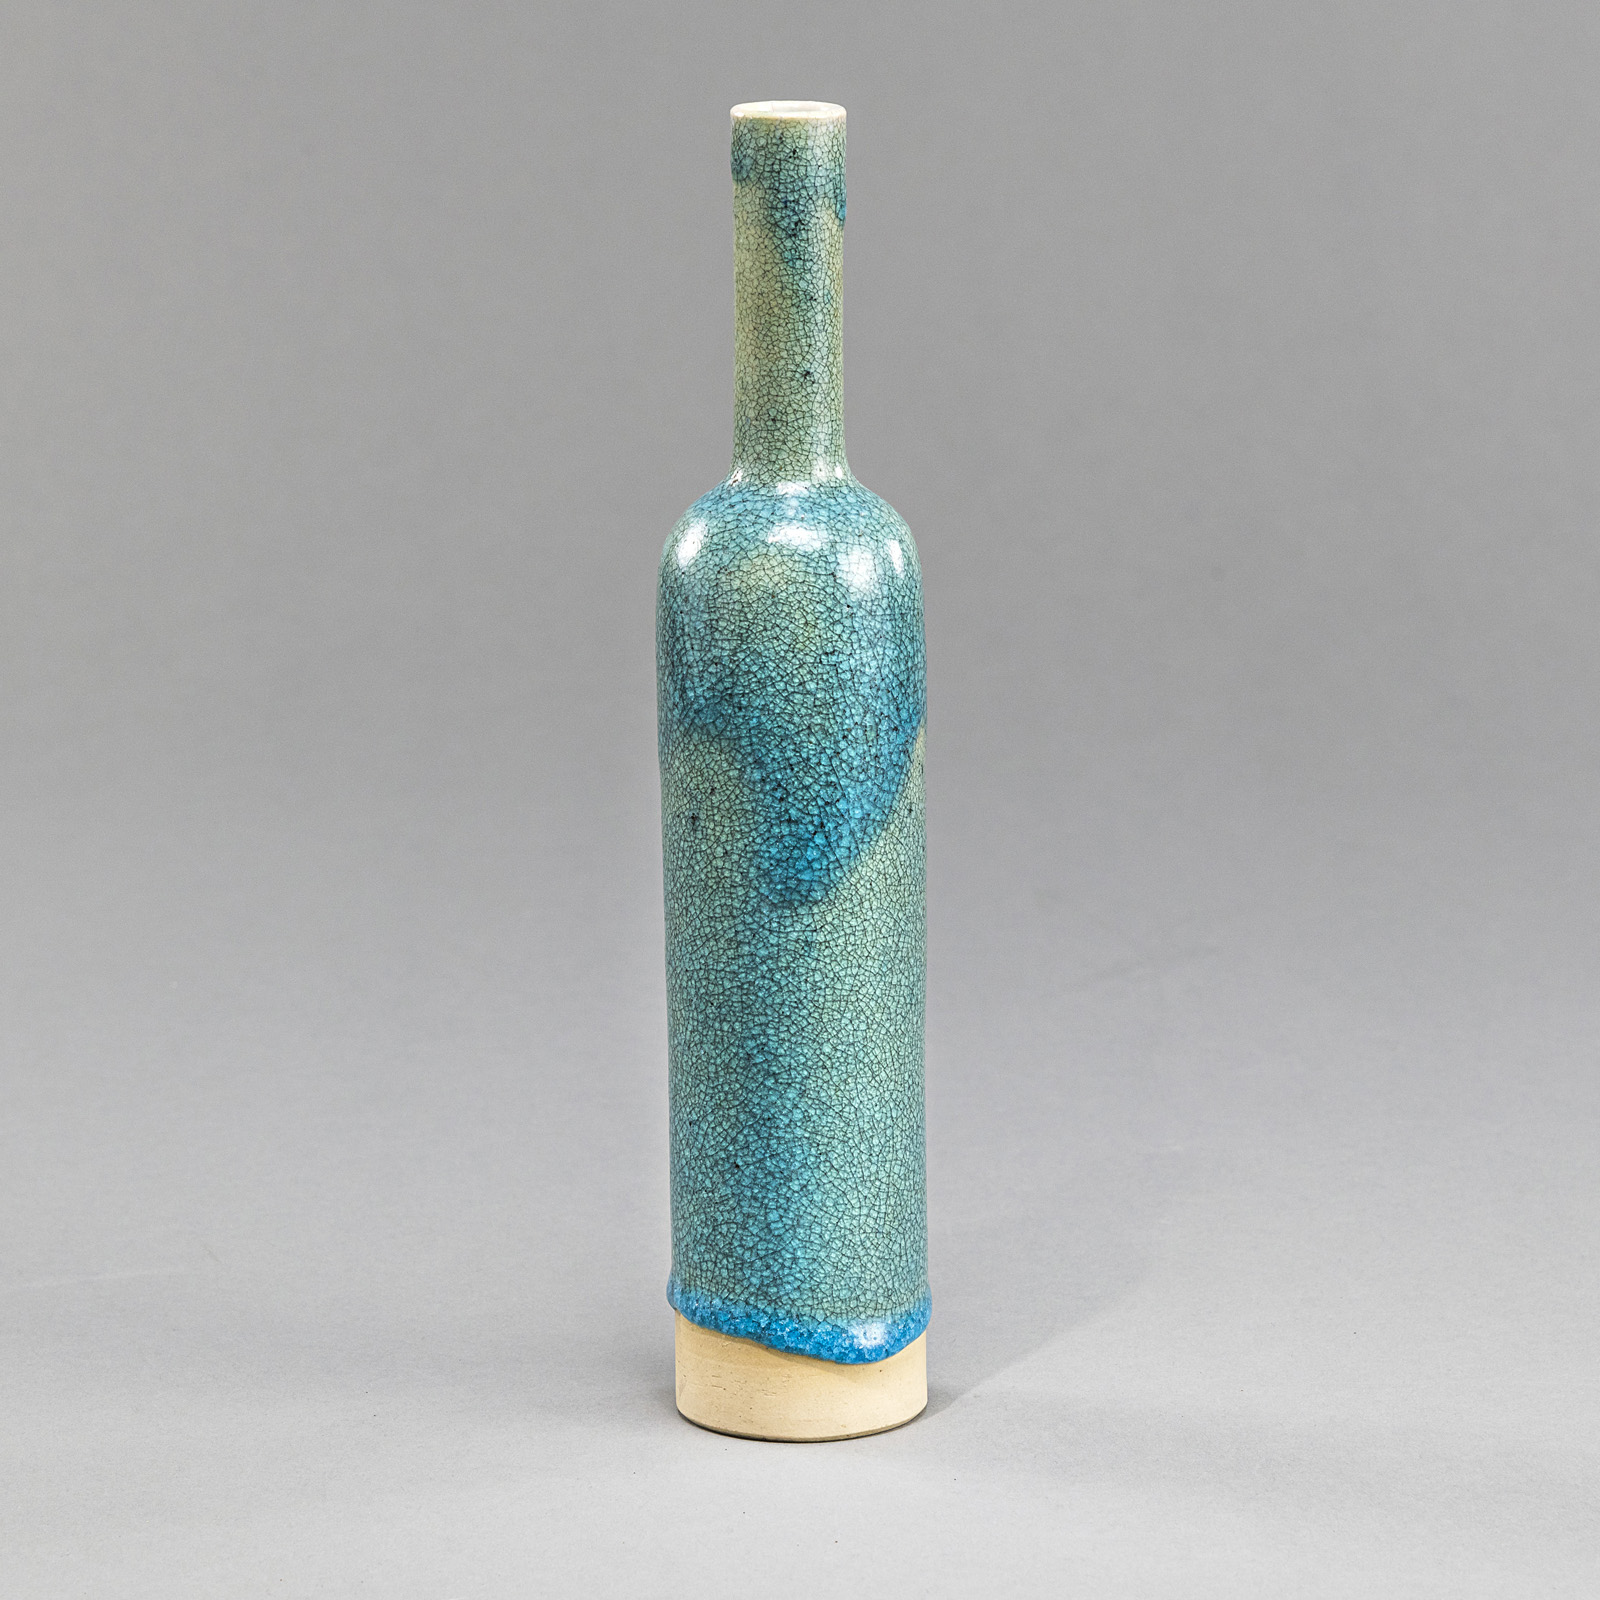 ARTIST VASE WITH TURQUOISE GREEN VASE